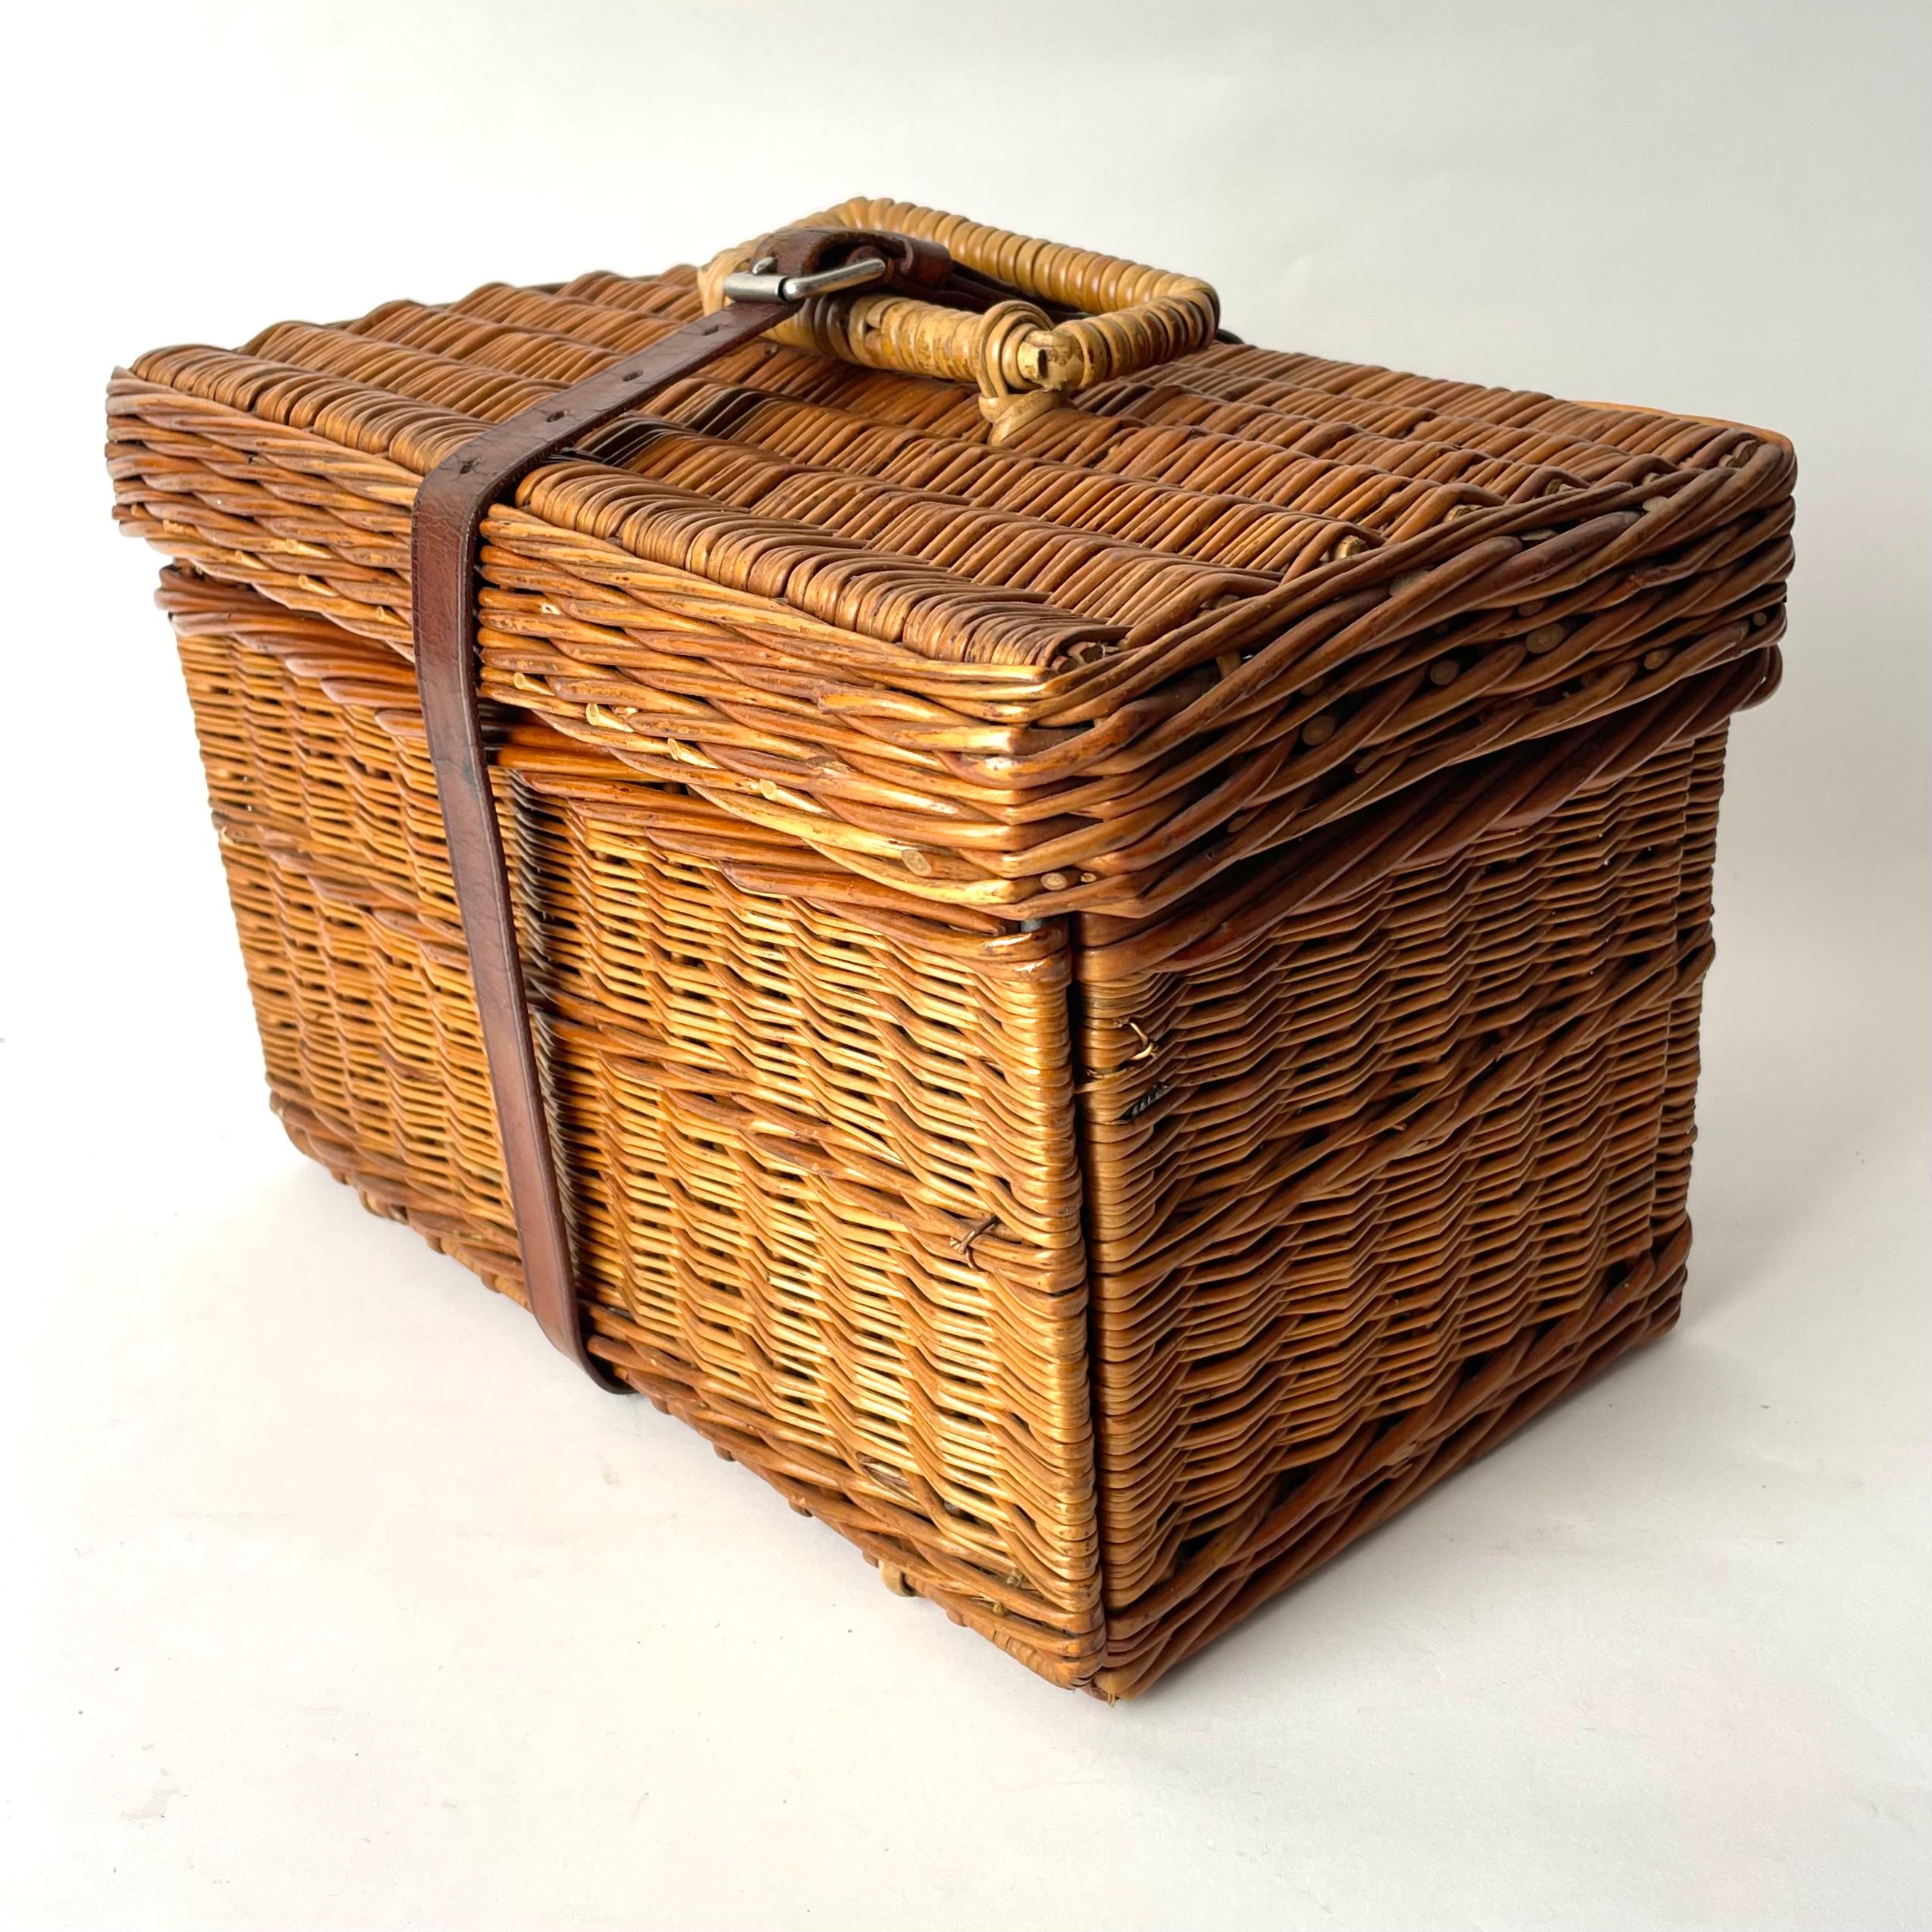 A late 19th Century/early 20th Century Picnic Basket in Rattan complete with interior pieces in Tinplate and Porcelain. Manufactured in London. Provenance, from the Swedish noble family Stjernswärd.

This charming and functional rattan picnic basket